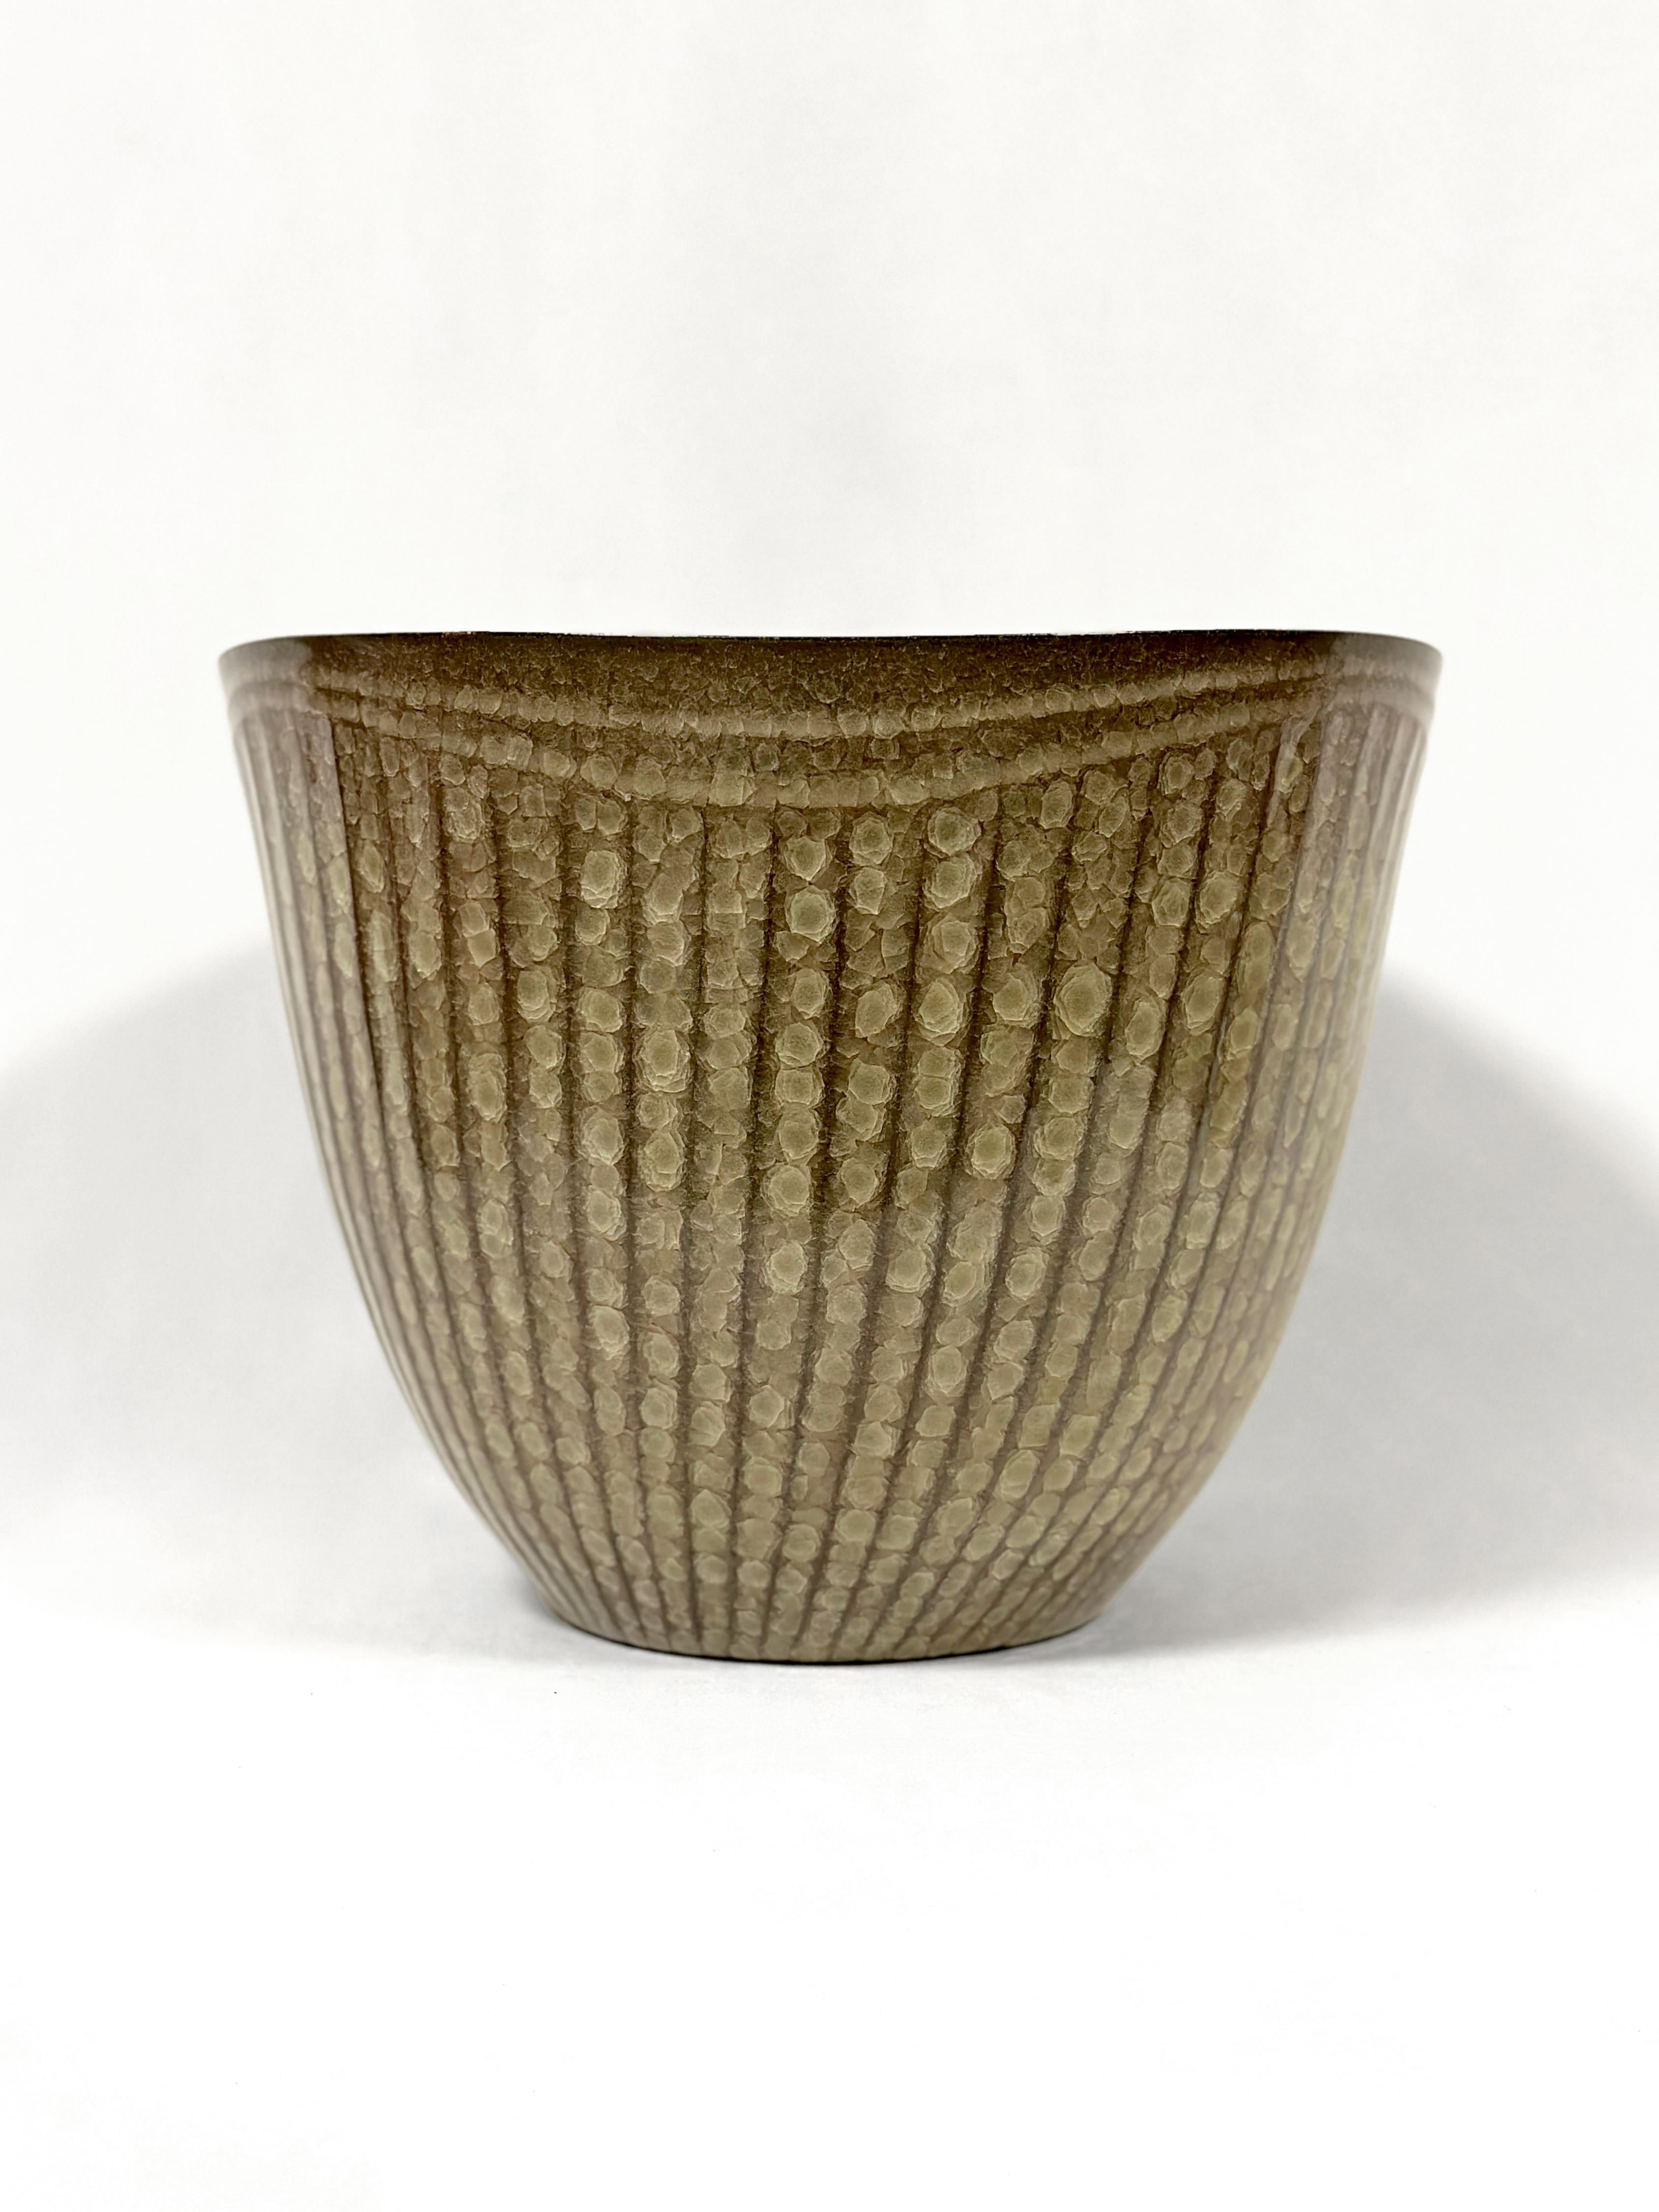 MINEGESHI SEIKO (b.1952)
Large Vessel, 2005
Celadon glaze with crackle layers
10.5 x 14 x 14 inches
With artist signed tomobako

PROVENACE
Artist's Studio
Joan Mirviss Ltd, New York, 2005
Private Collection, MA 